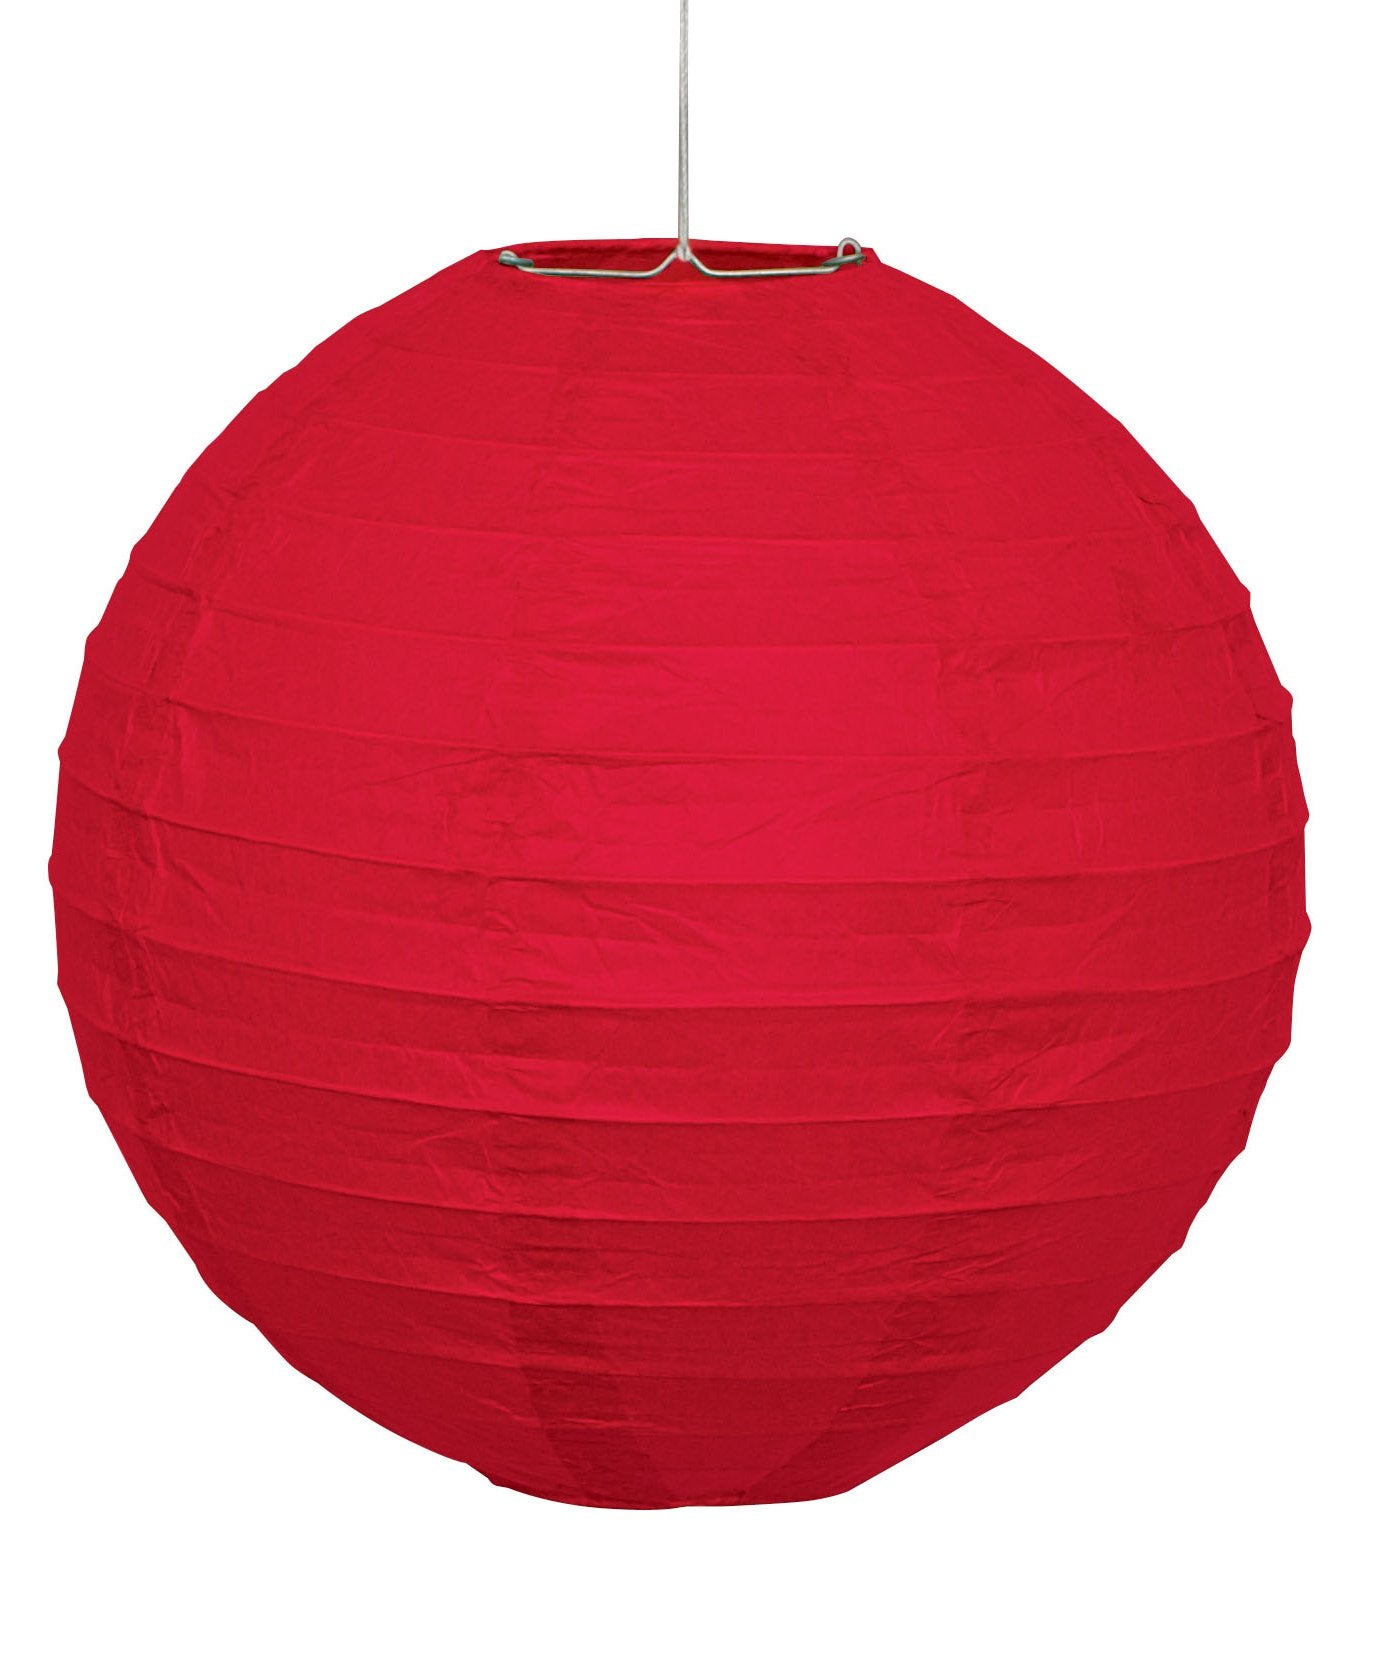 red paper lanterns for sale online in Dubai